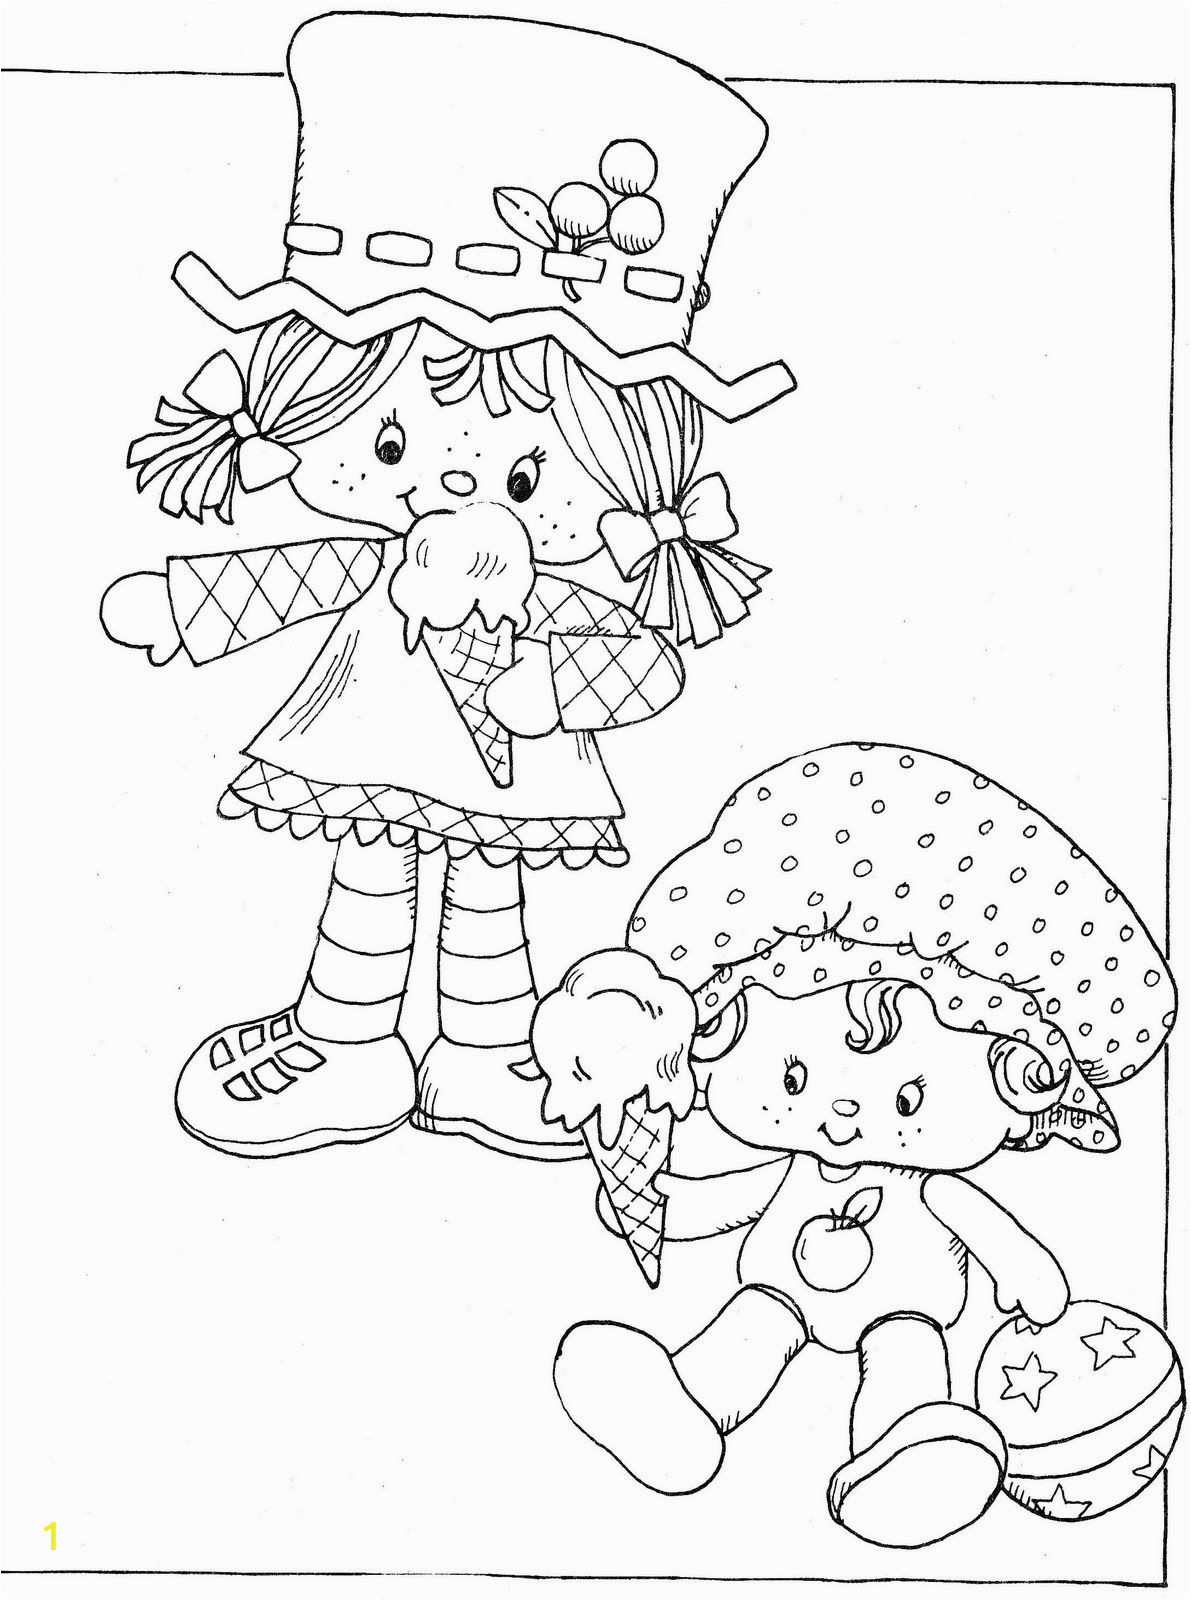 Strawberry Shortcake Cartoon Coloring Pages Pin by Berry Happy Home On Winter Fun Coloring Book